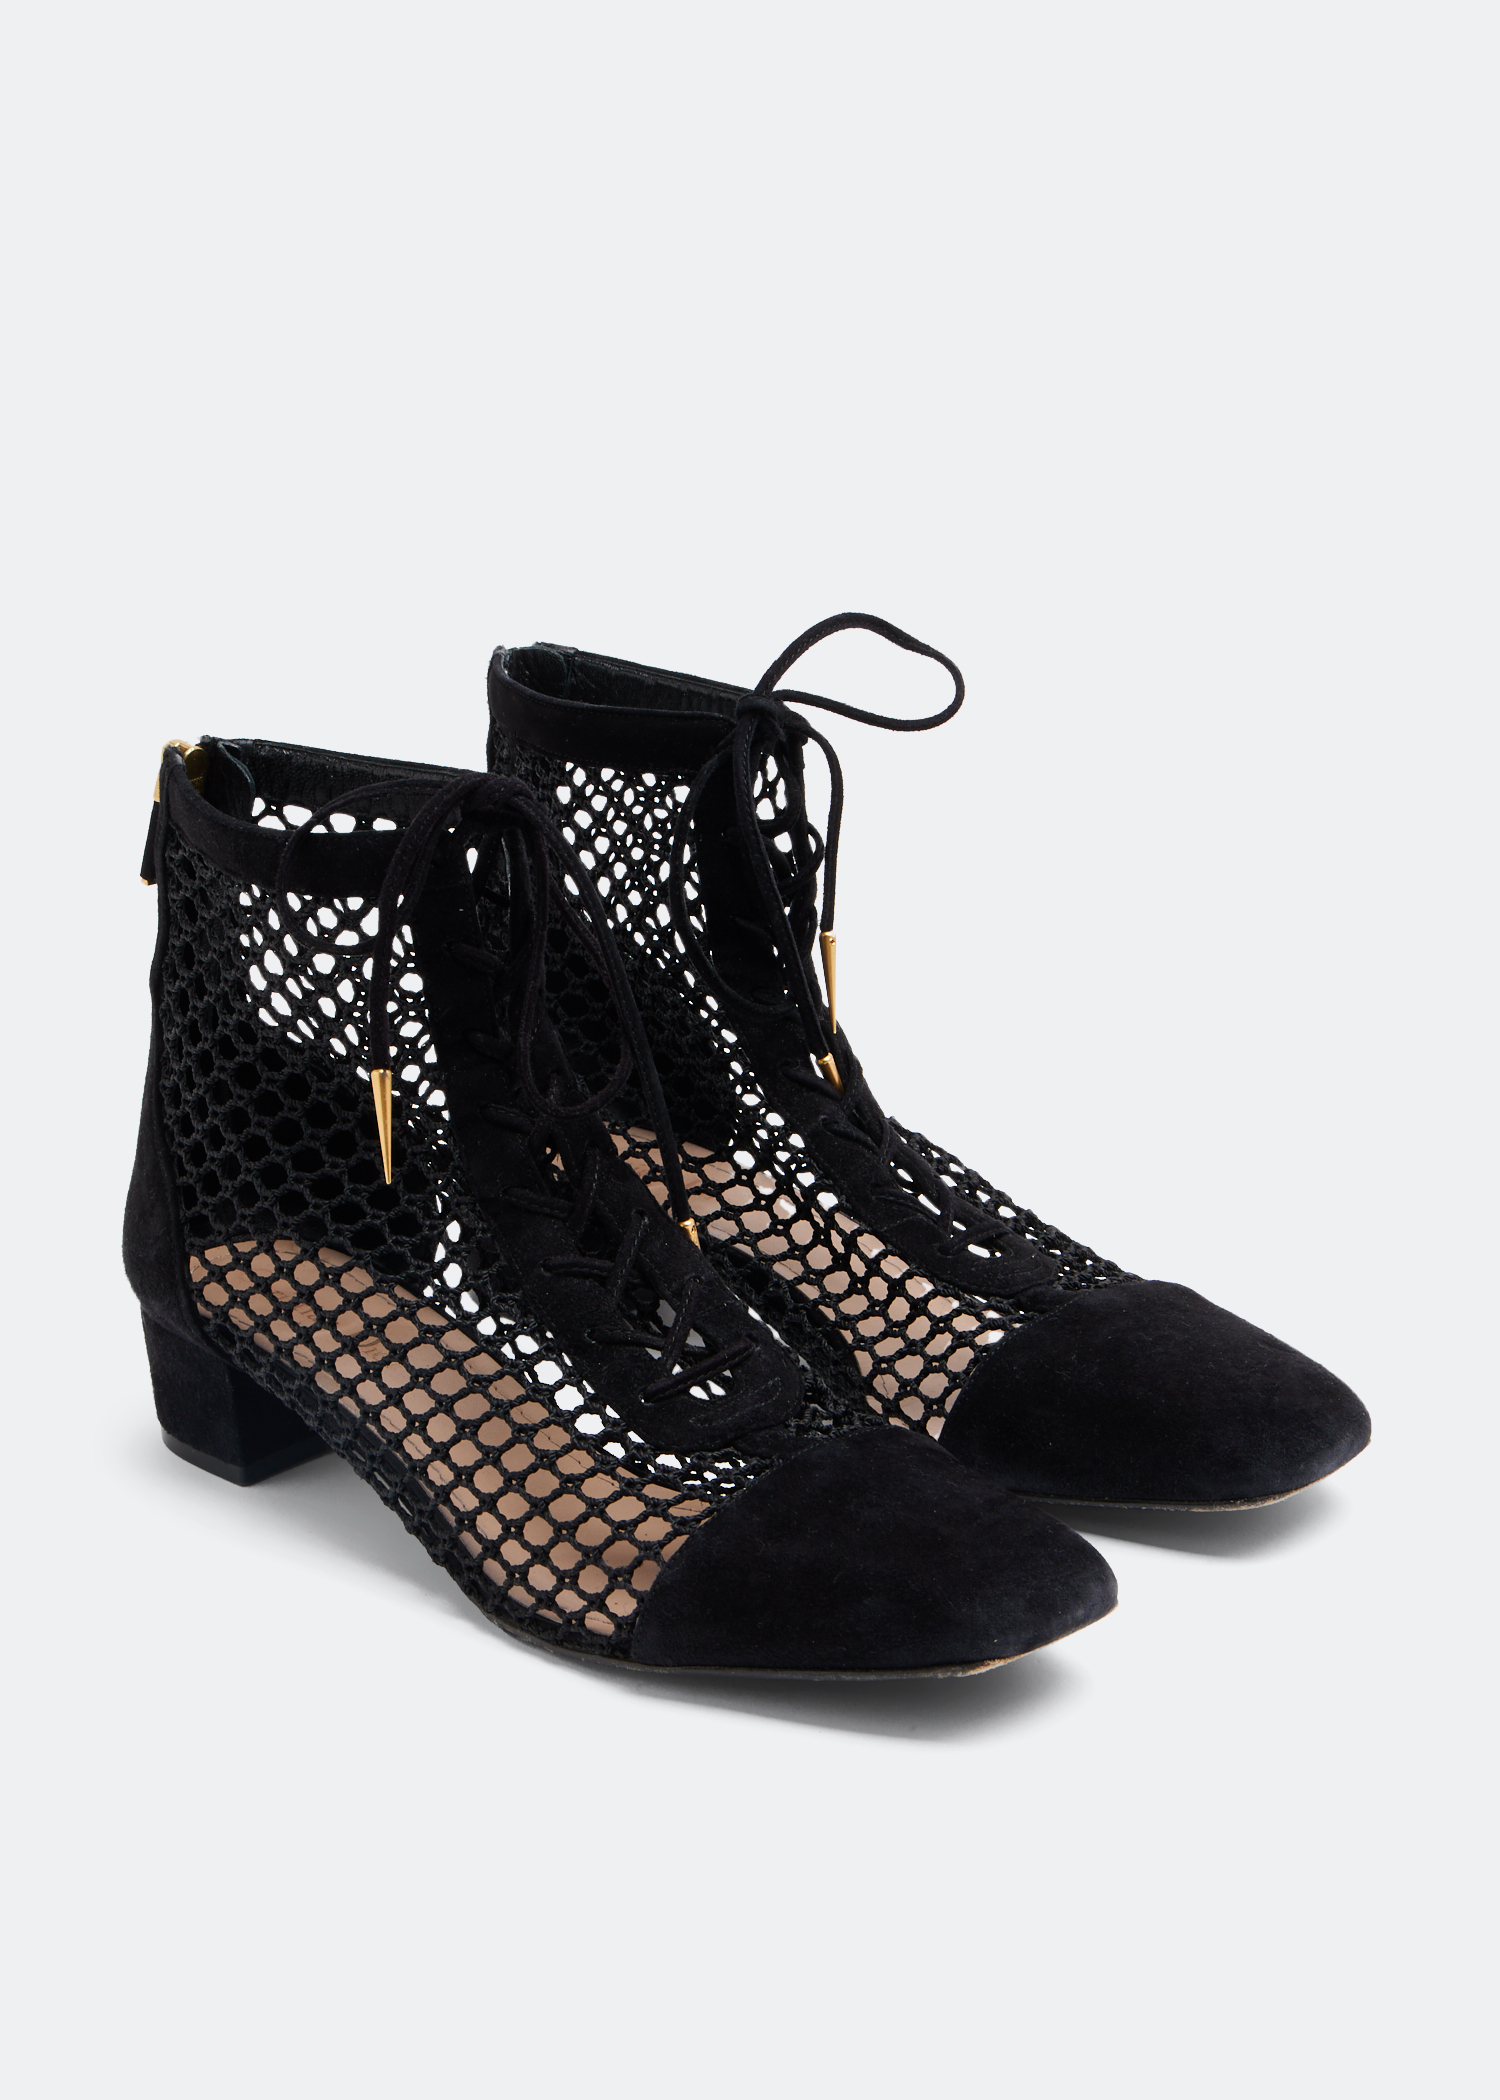 Dior Naughtily-D ankle boots✨